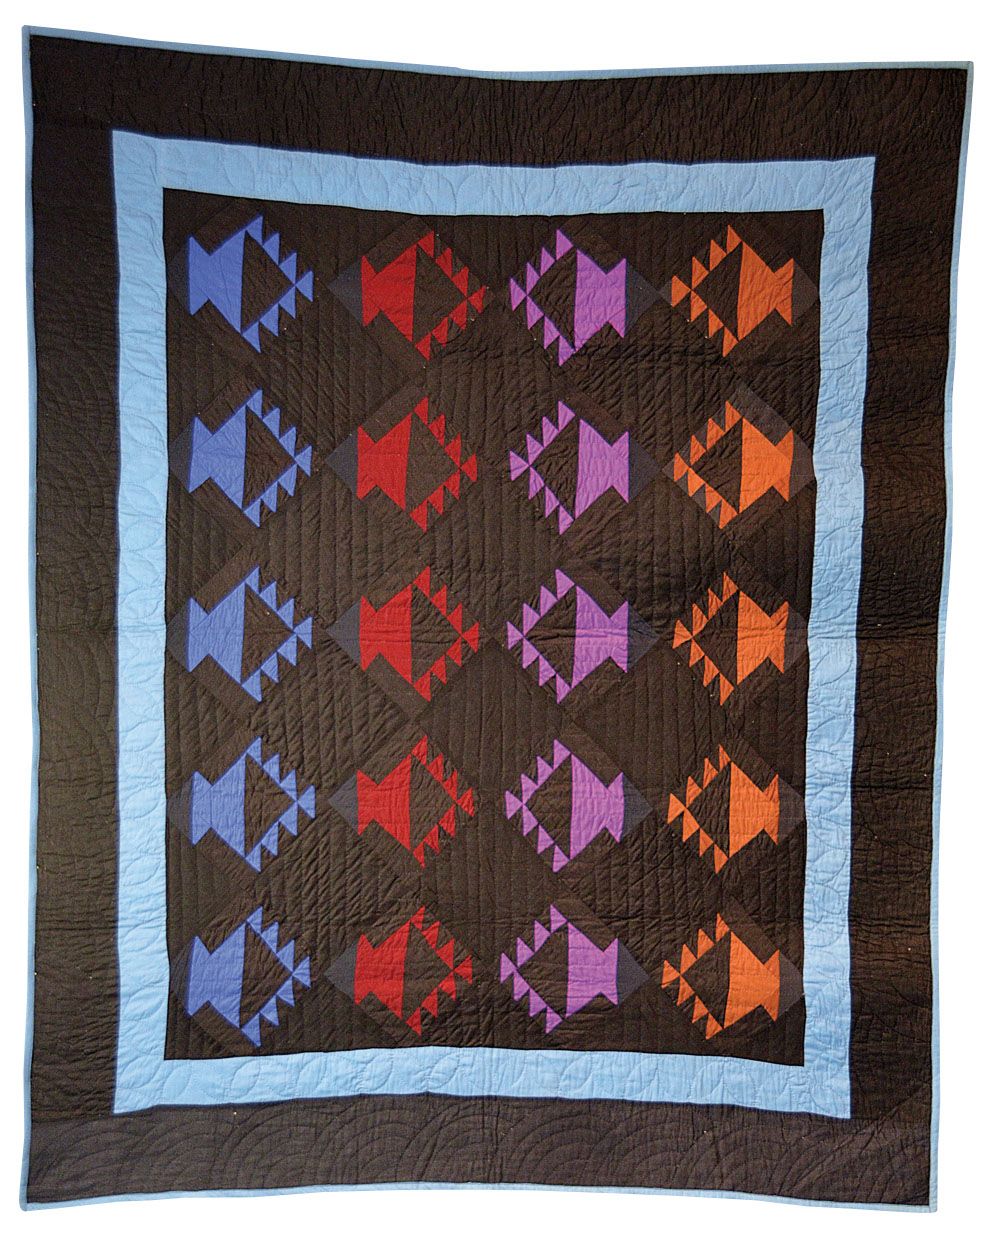 I would love to see Amish women sit around a quilting frame